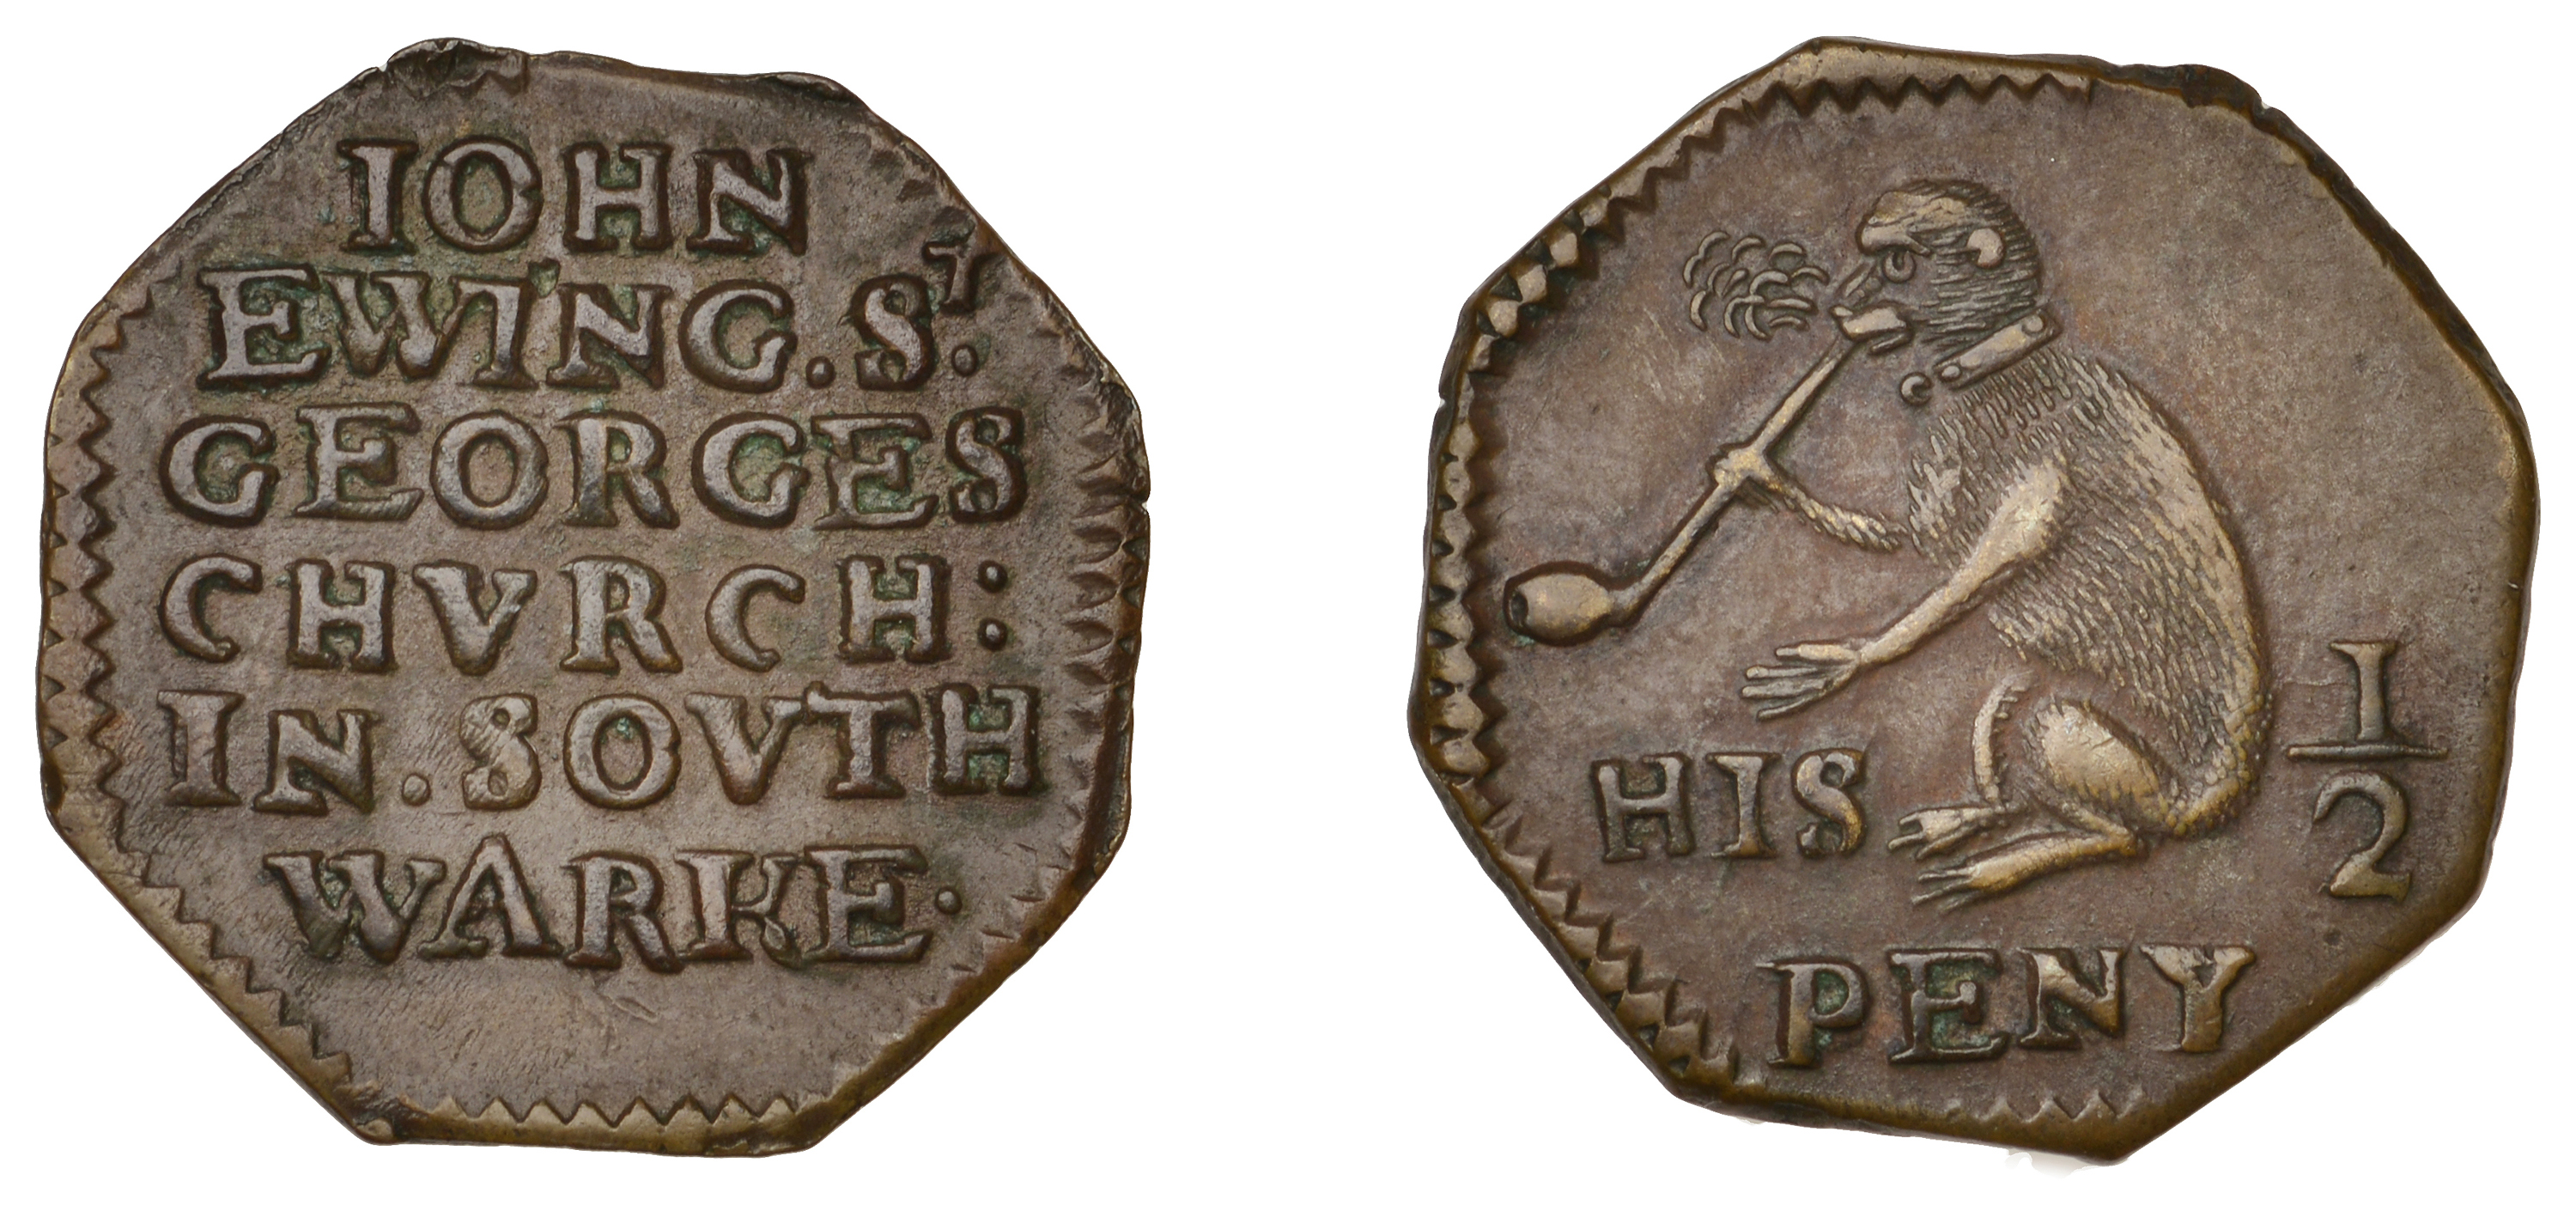 The Collection of 17th Century Tokens formed by the late Robert Thompson (Part III: Final)